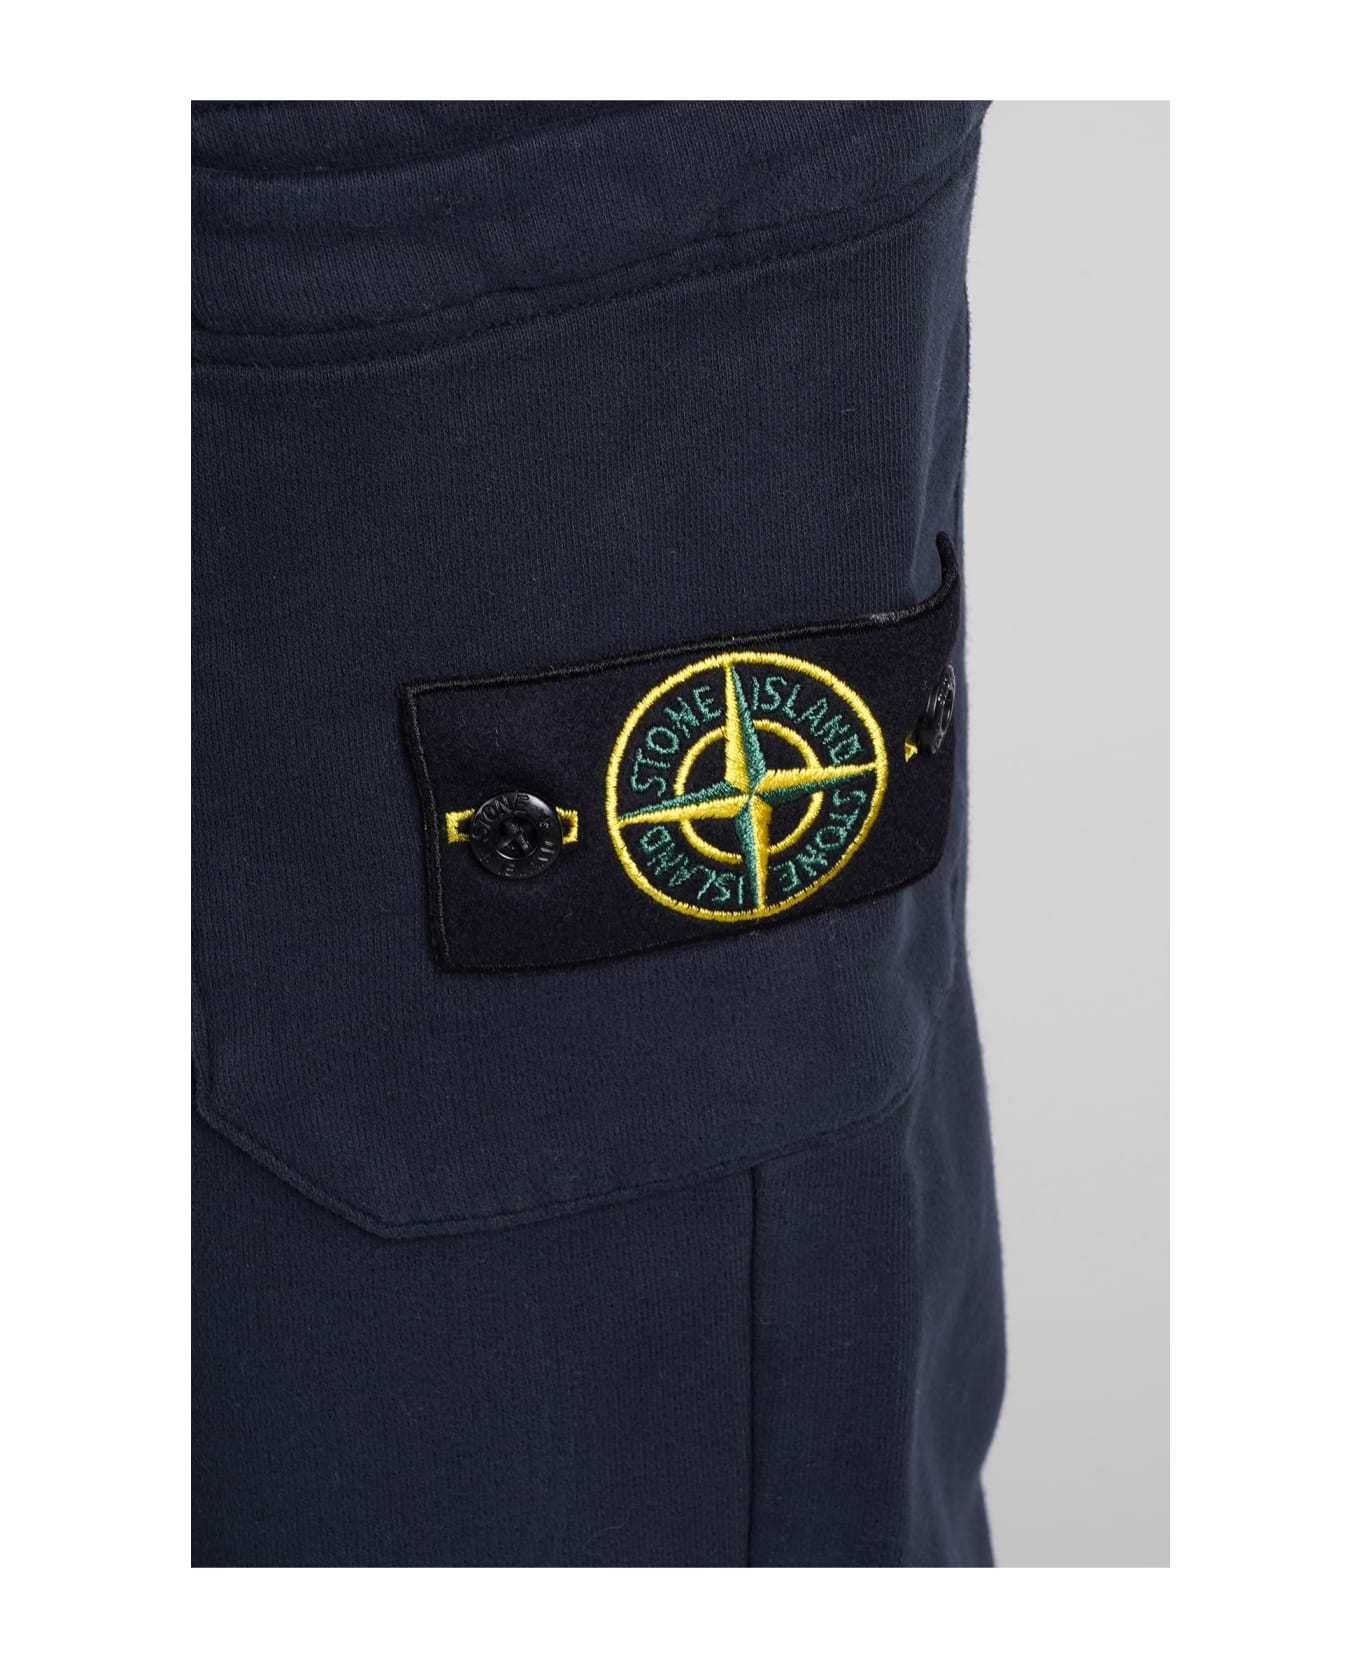 Stone Island Pants In Blue Cotton - Navy blue